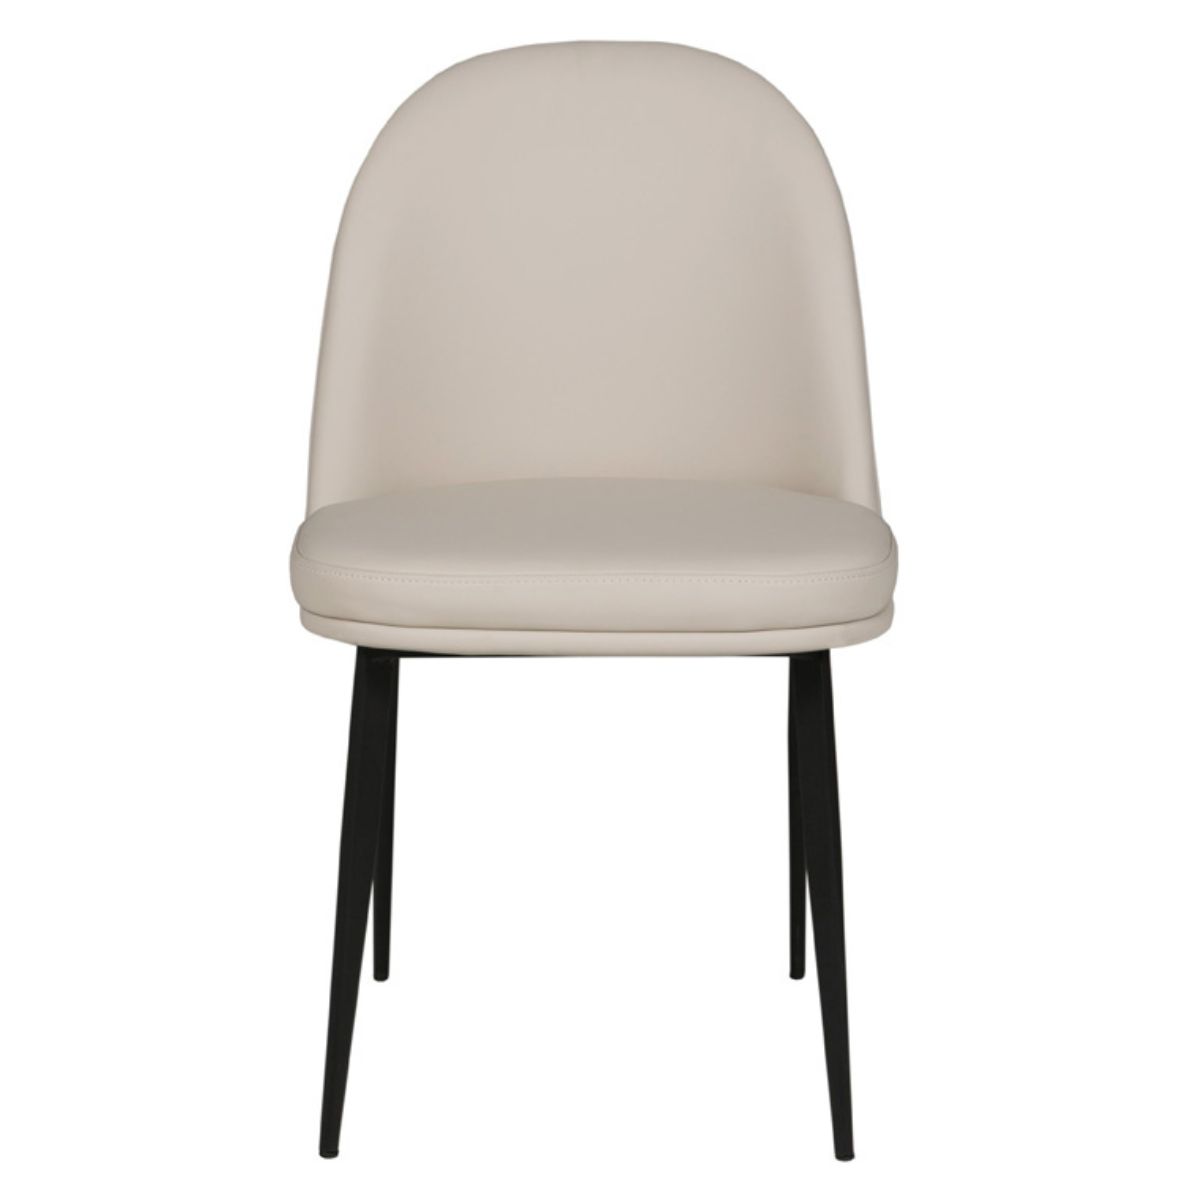 Valentia Leather Dining Chair Beige - 2